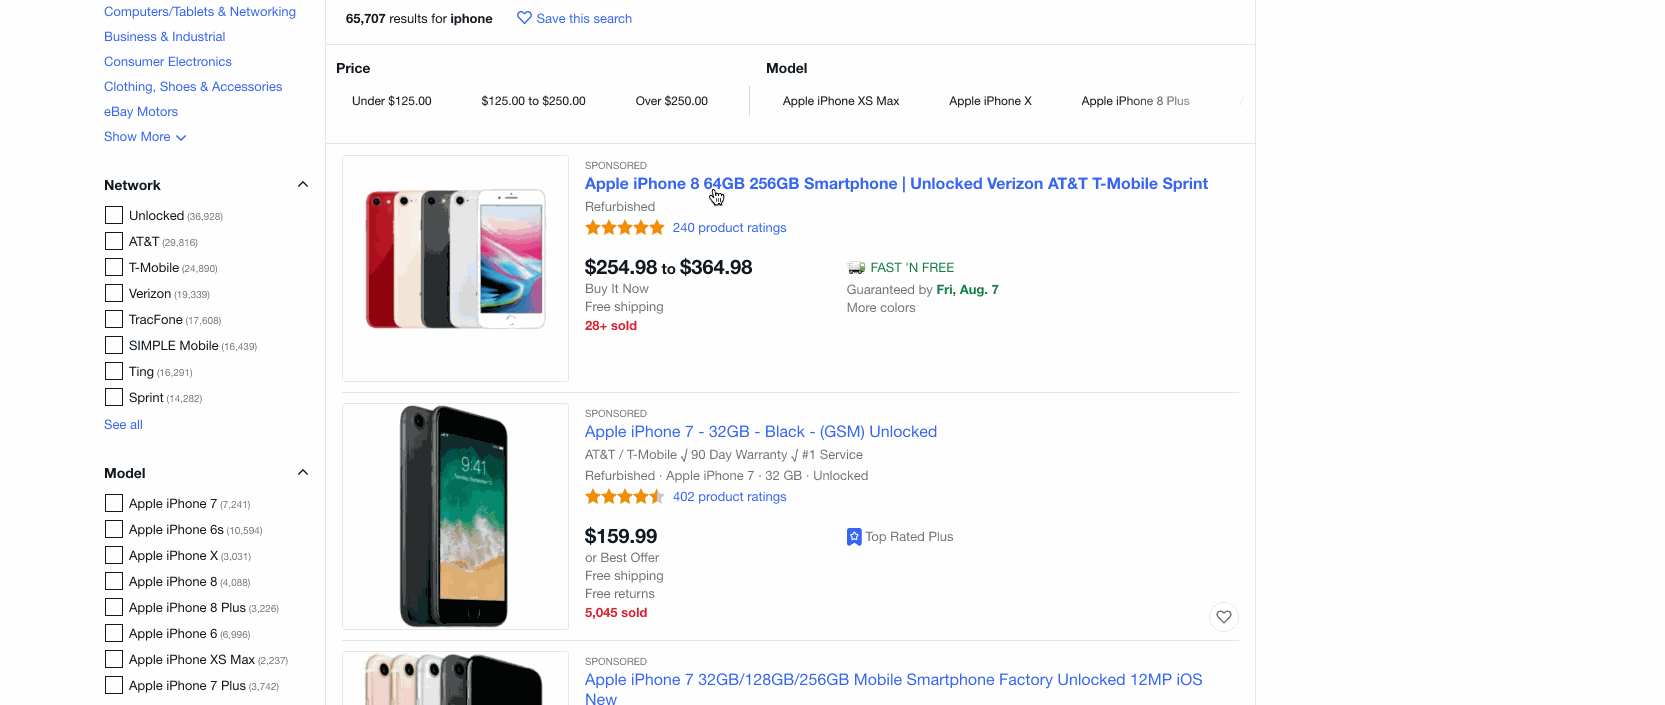 Fakespot Chrome Extension in action on eBay